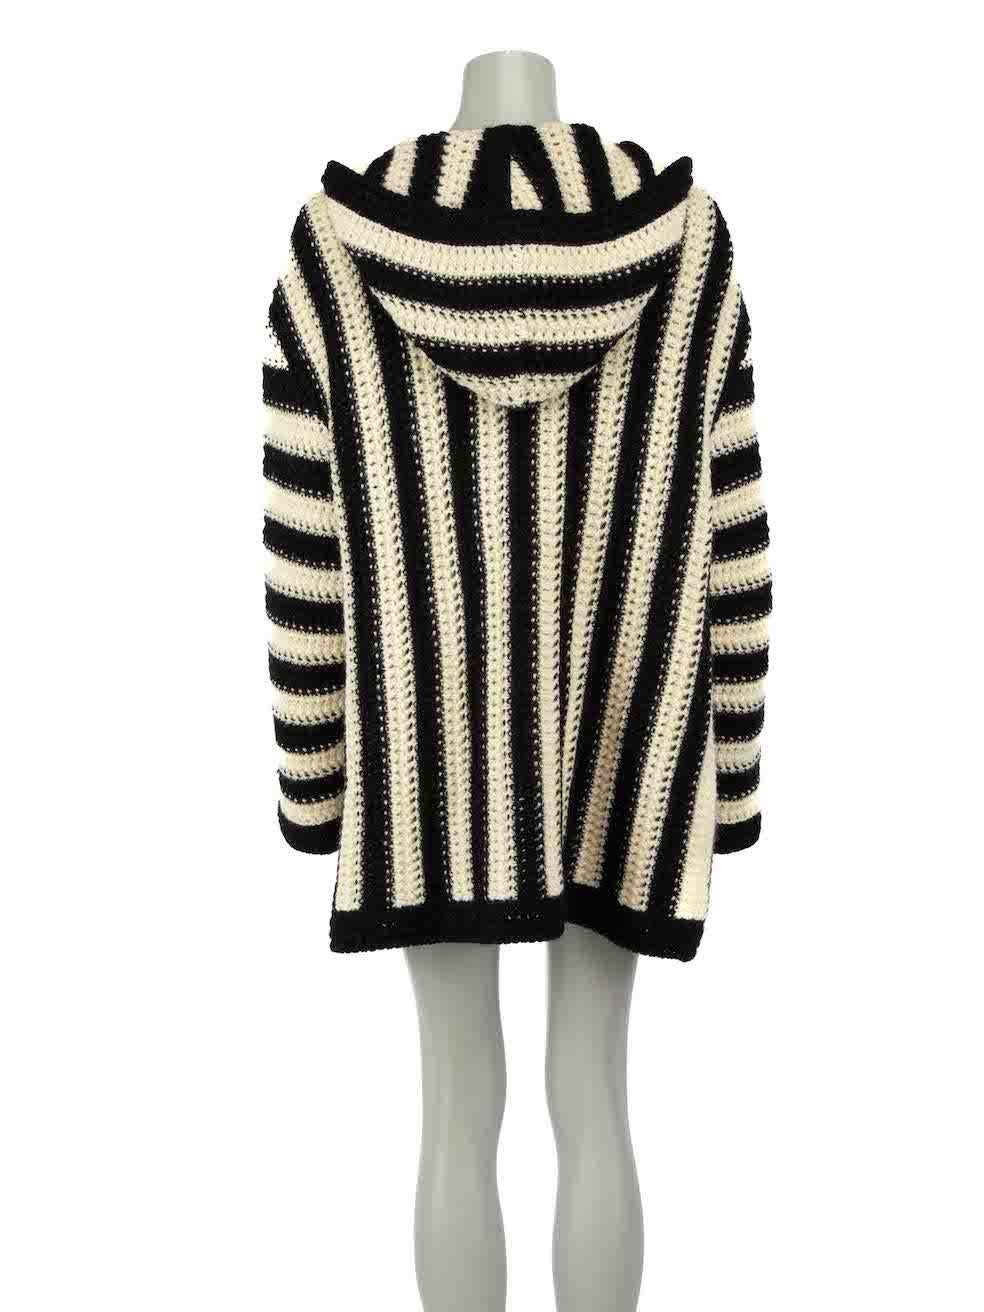 Saint Laurent Striped Wool Knit Hooded Cardigan Size XS In Good Condition For Sale In London, GB